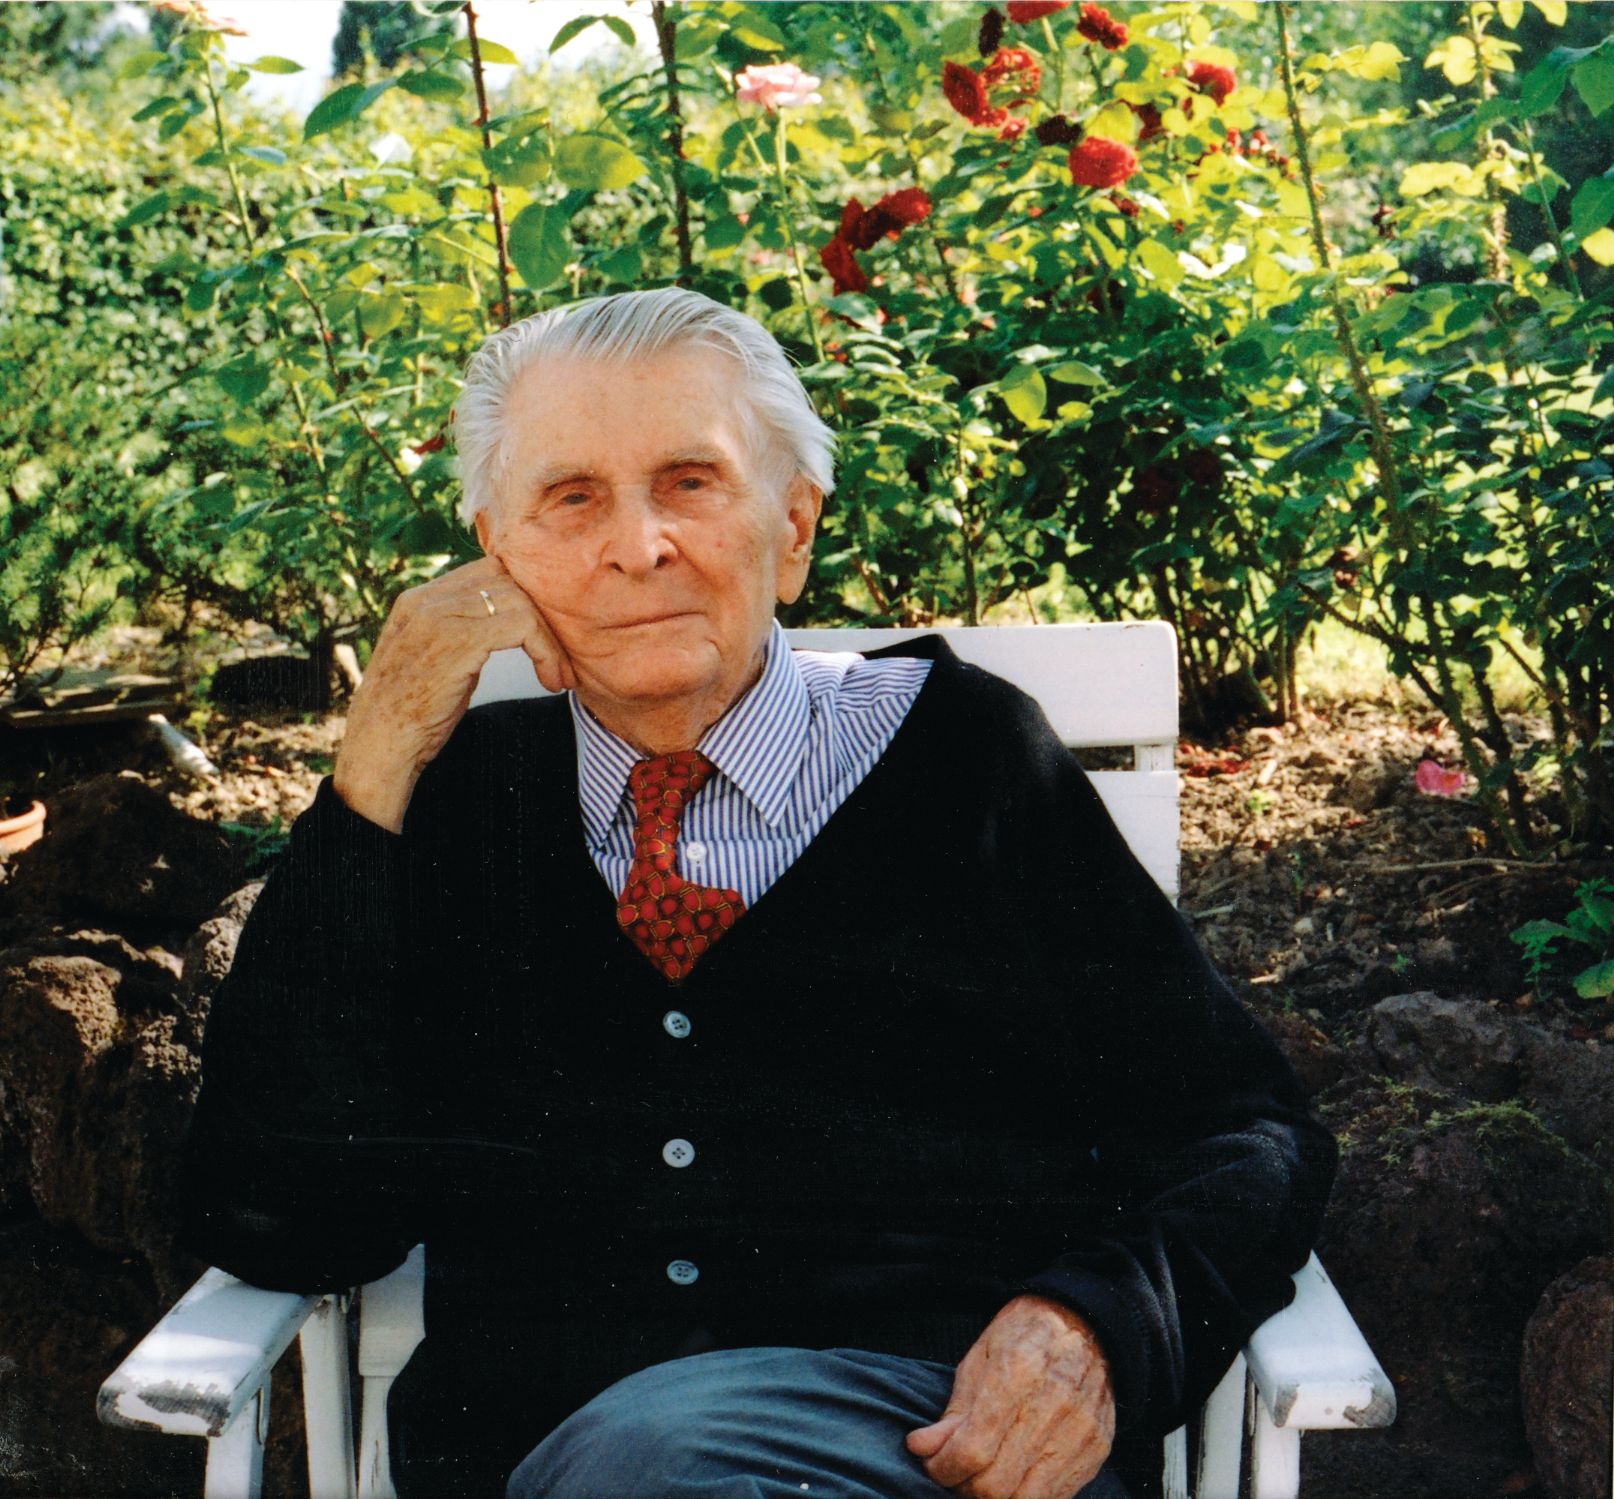 Erwin Wickert as photographed by the author in 2001.